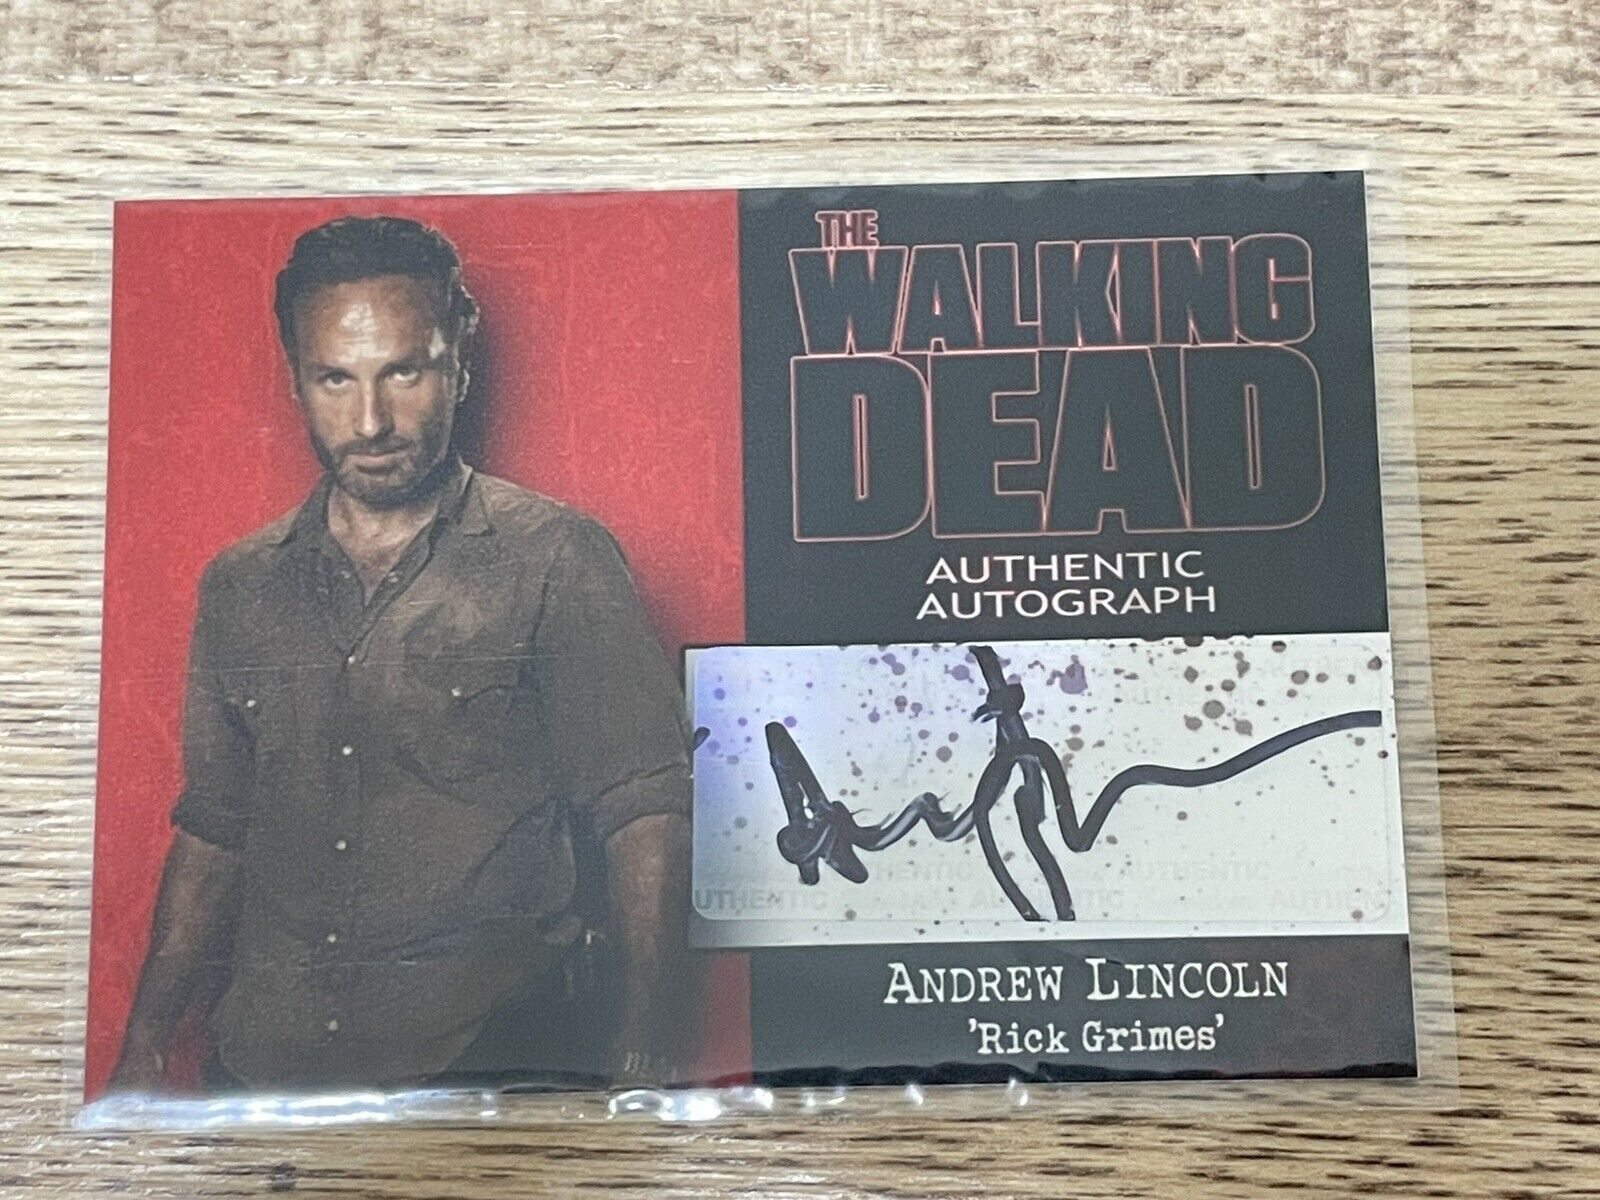 THE WALKING DEAD Card Autograph ANDREW LINCOLN Rick Grimes Rare